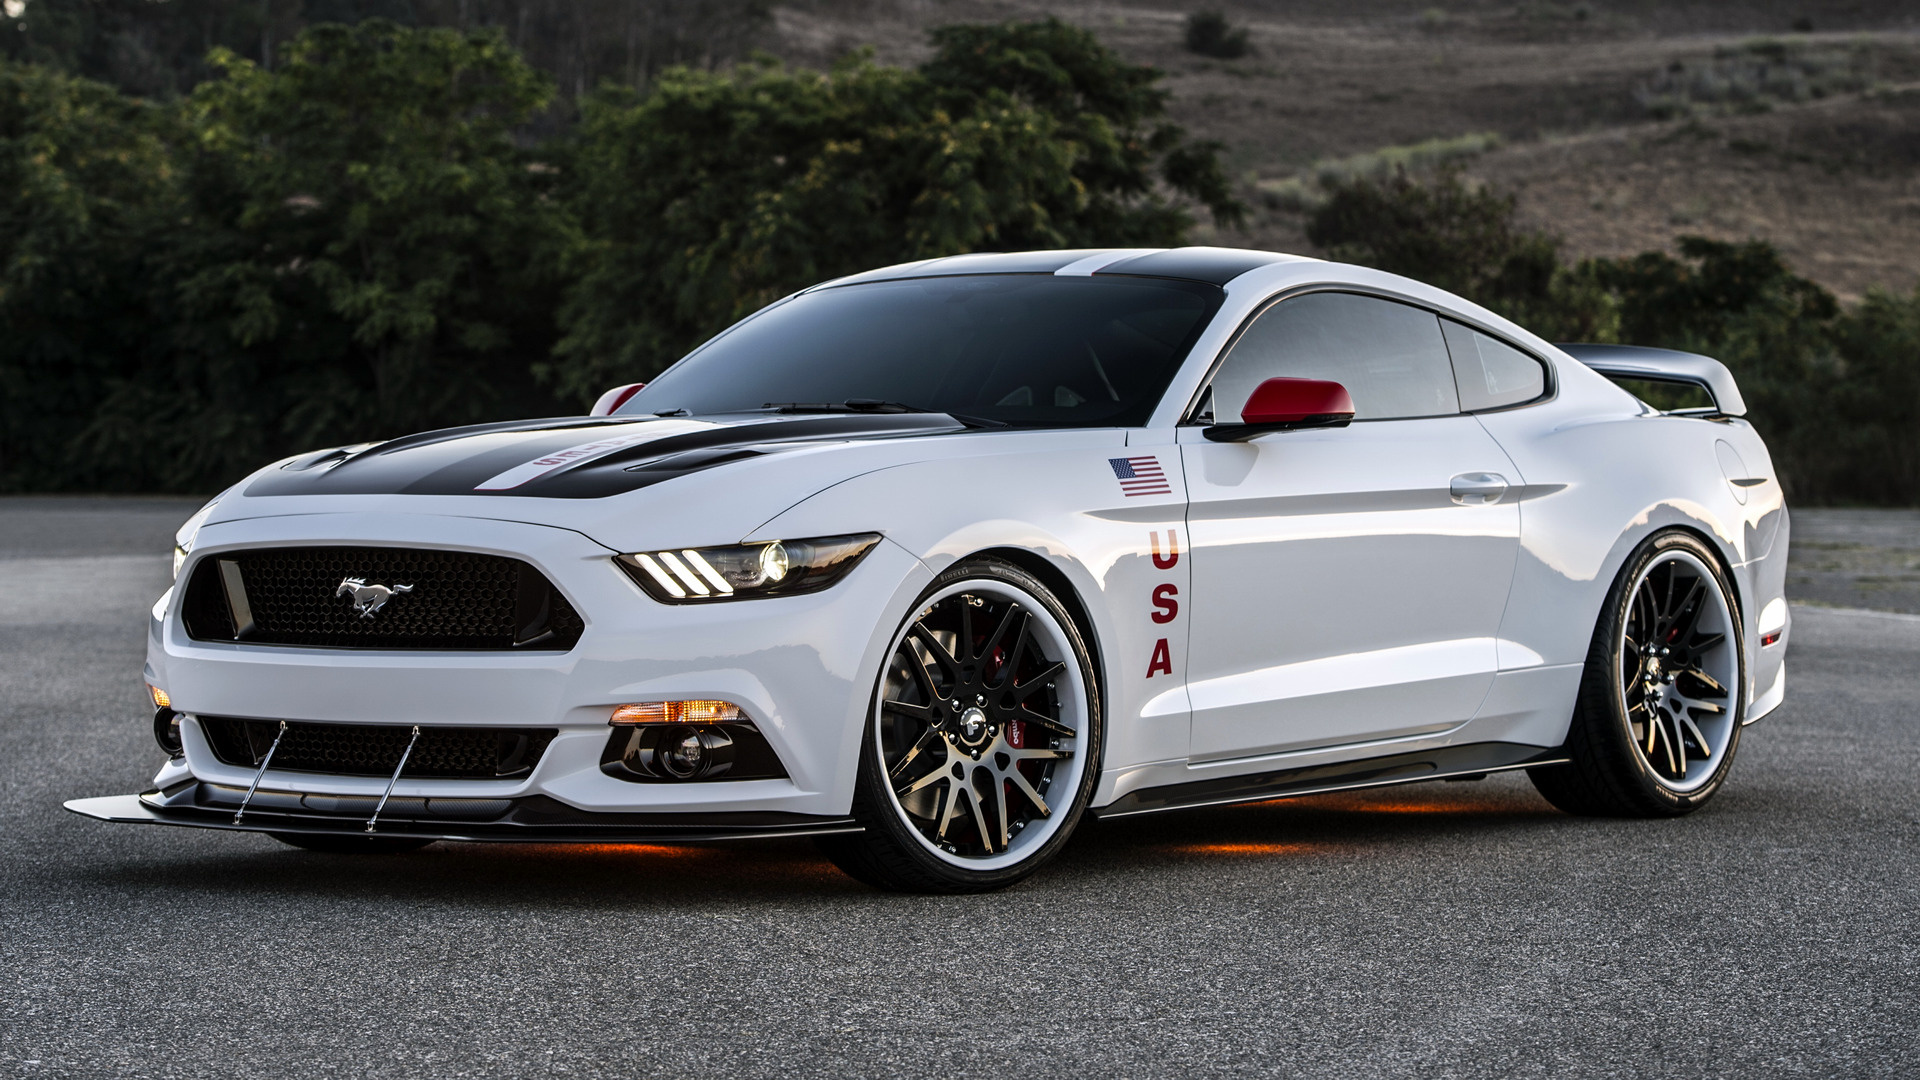 2015 Ford Mustang Apollo Edition - Wallpapers and HD ...
 2015 Ford Mustang Wallpaper Hd